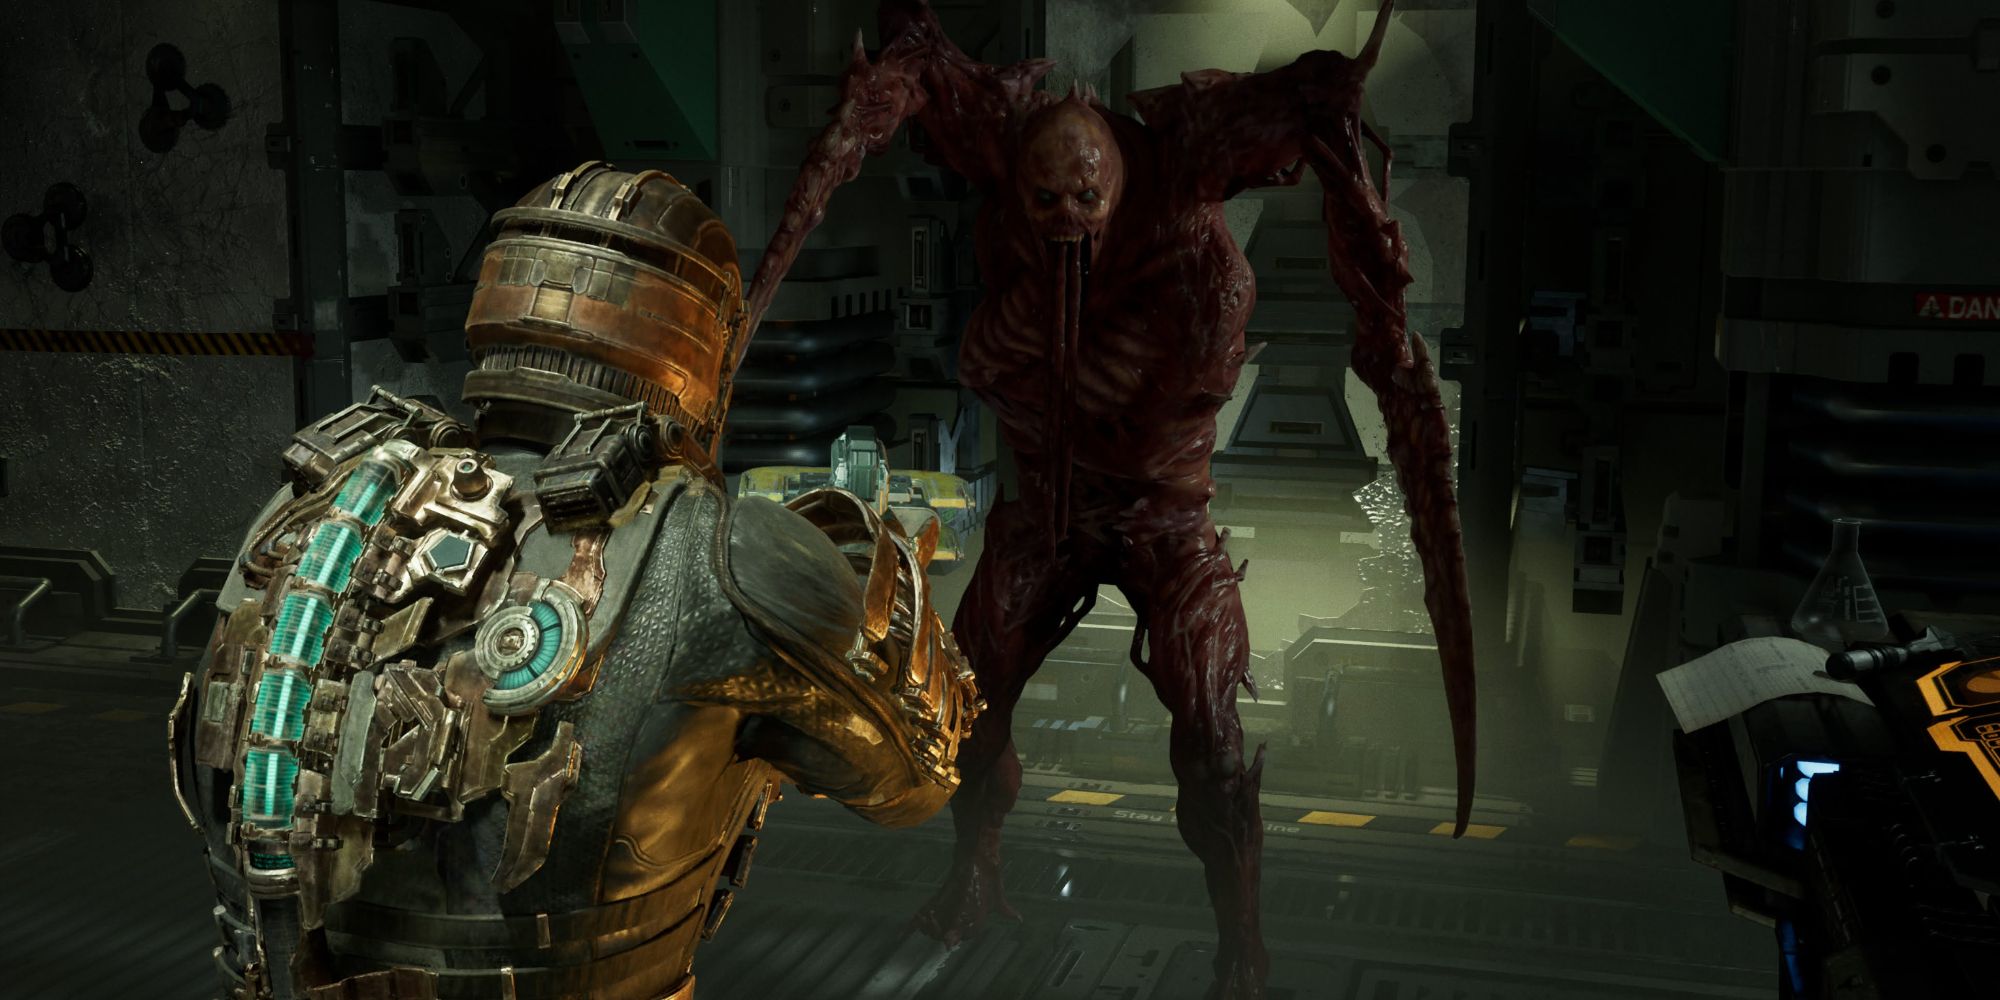 The Hunter after bursting from his containment tube in the Dead Space remake.